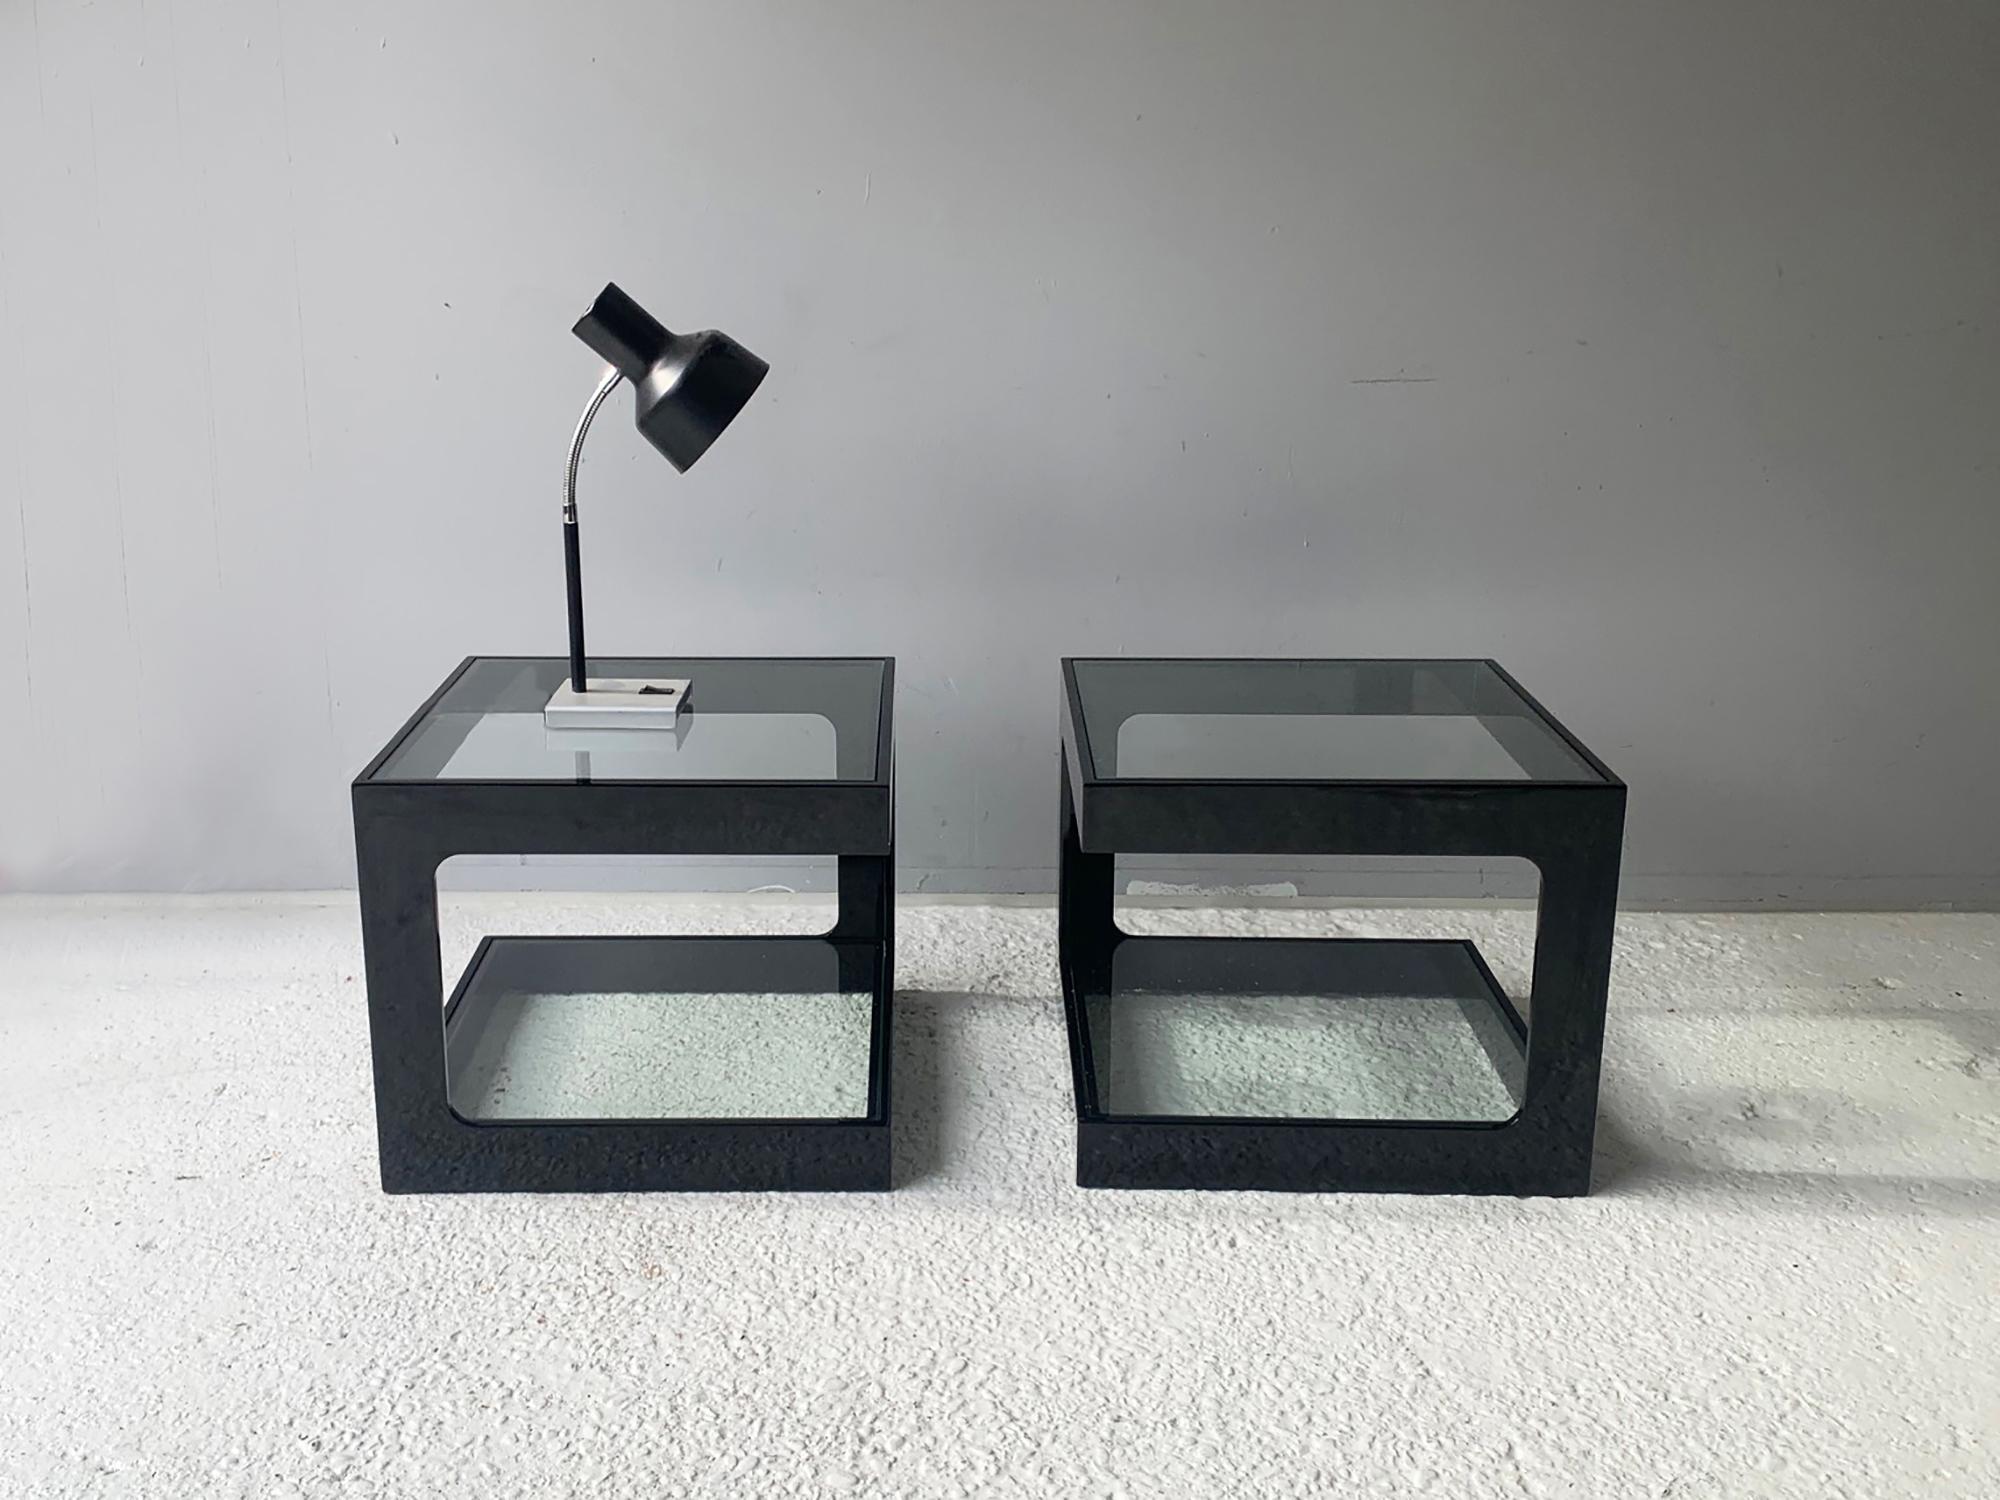 Angular cube shaped tables, work equally aswell as coffee tables or bedside tables. Produced in France in the late 1970s/early 1980s. Each has a high gloss black plastic frame with two clear glass surfaces.

Happy to sell individually or as a